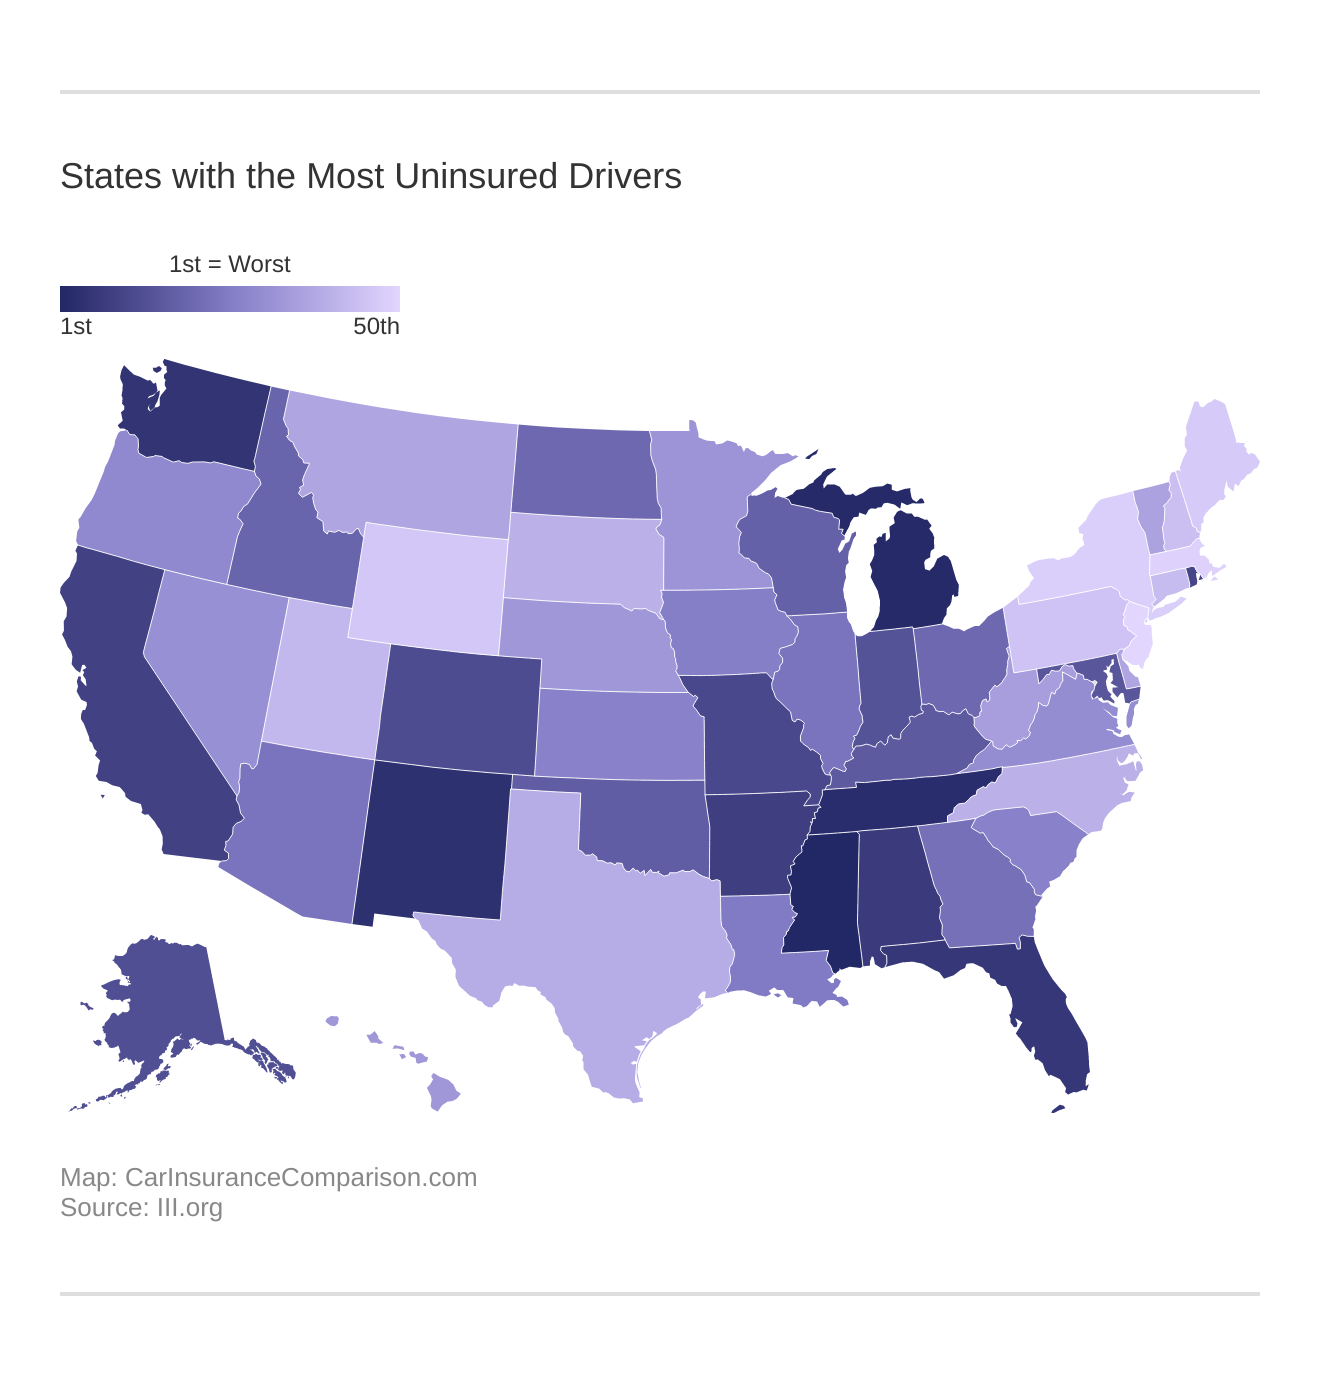 States with the Most Uninsured Drivers